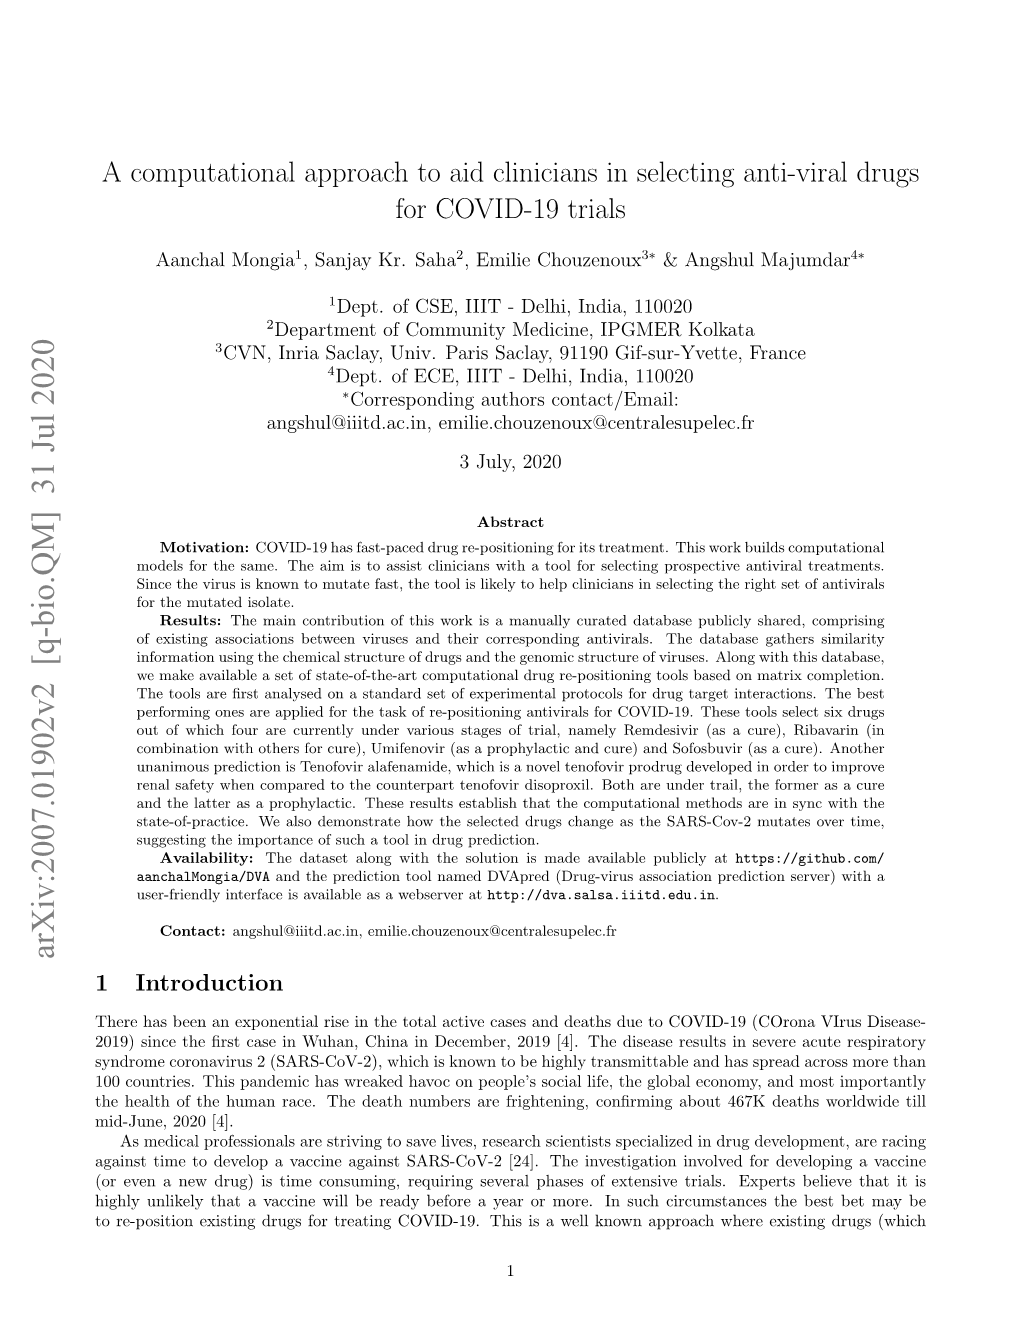 A Computational Approach to Aid Clinicians in Selecting Anti-Viral Drugs for COVID-19 Trials